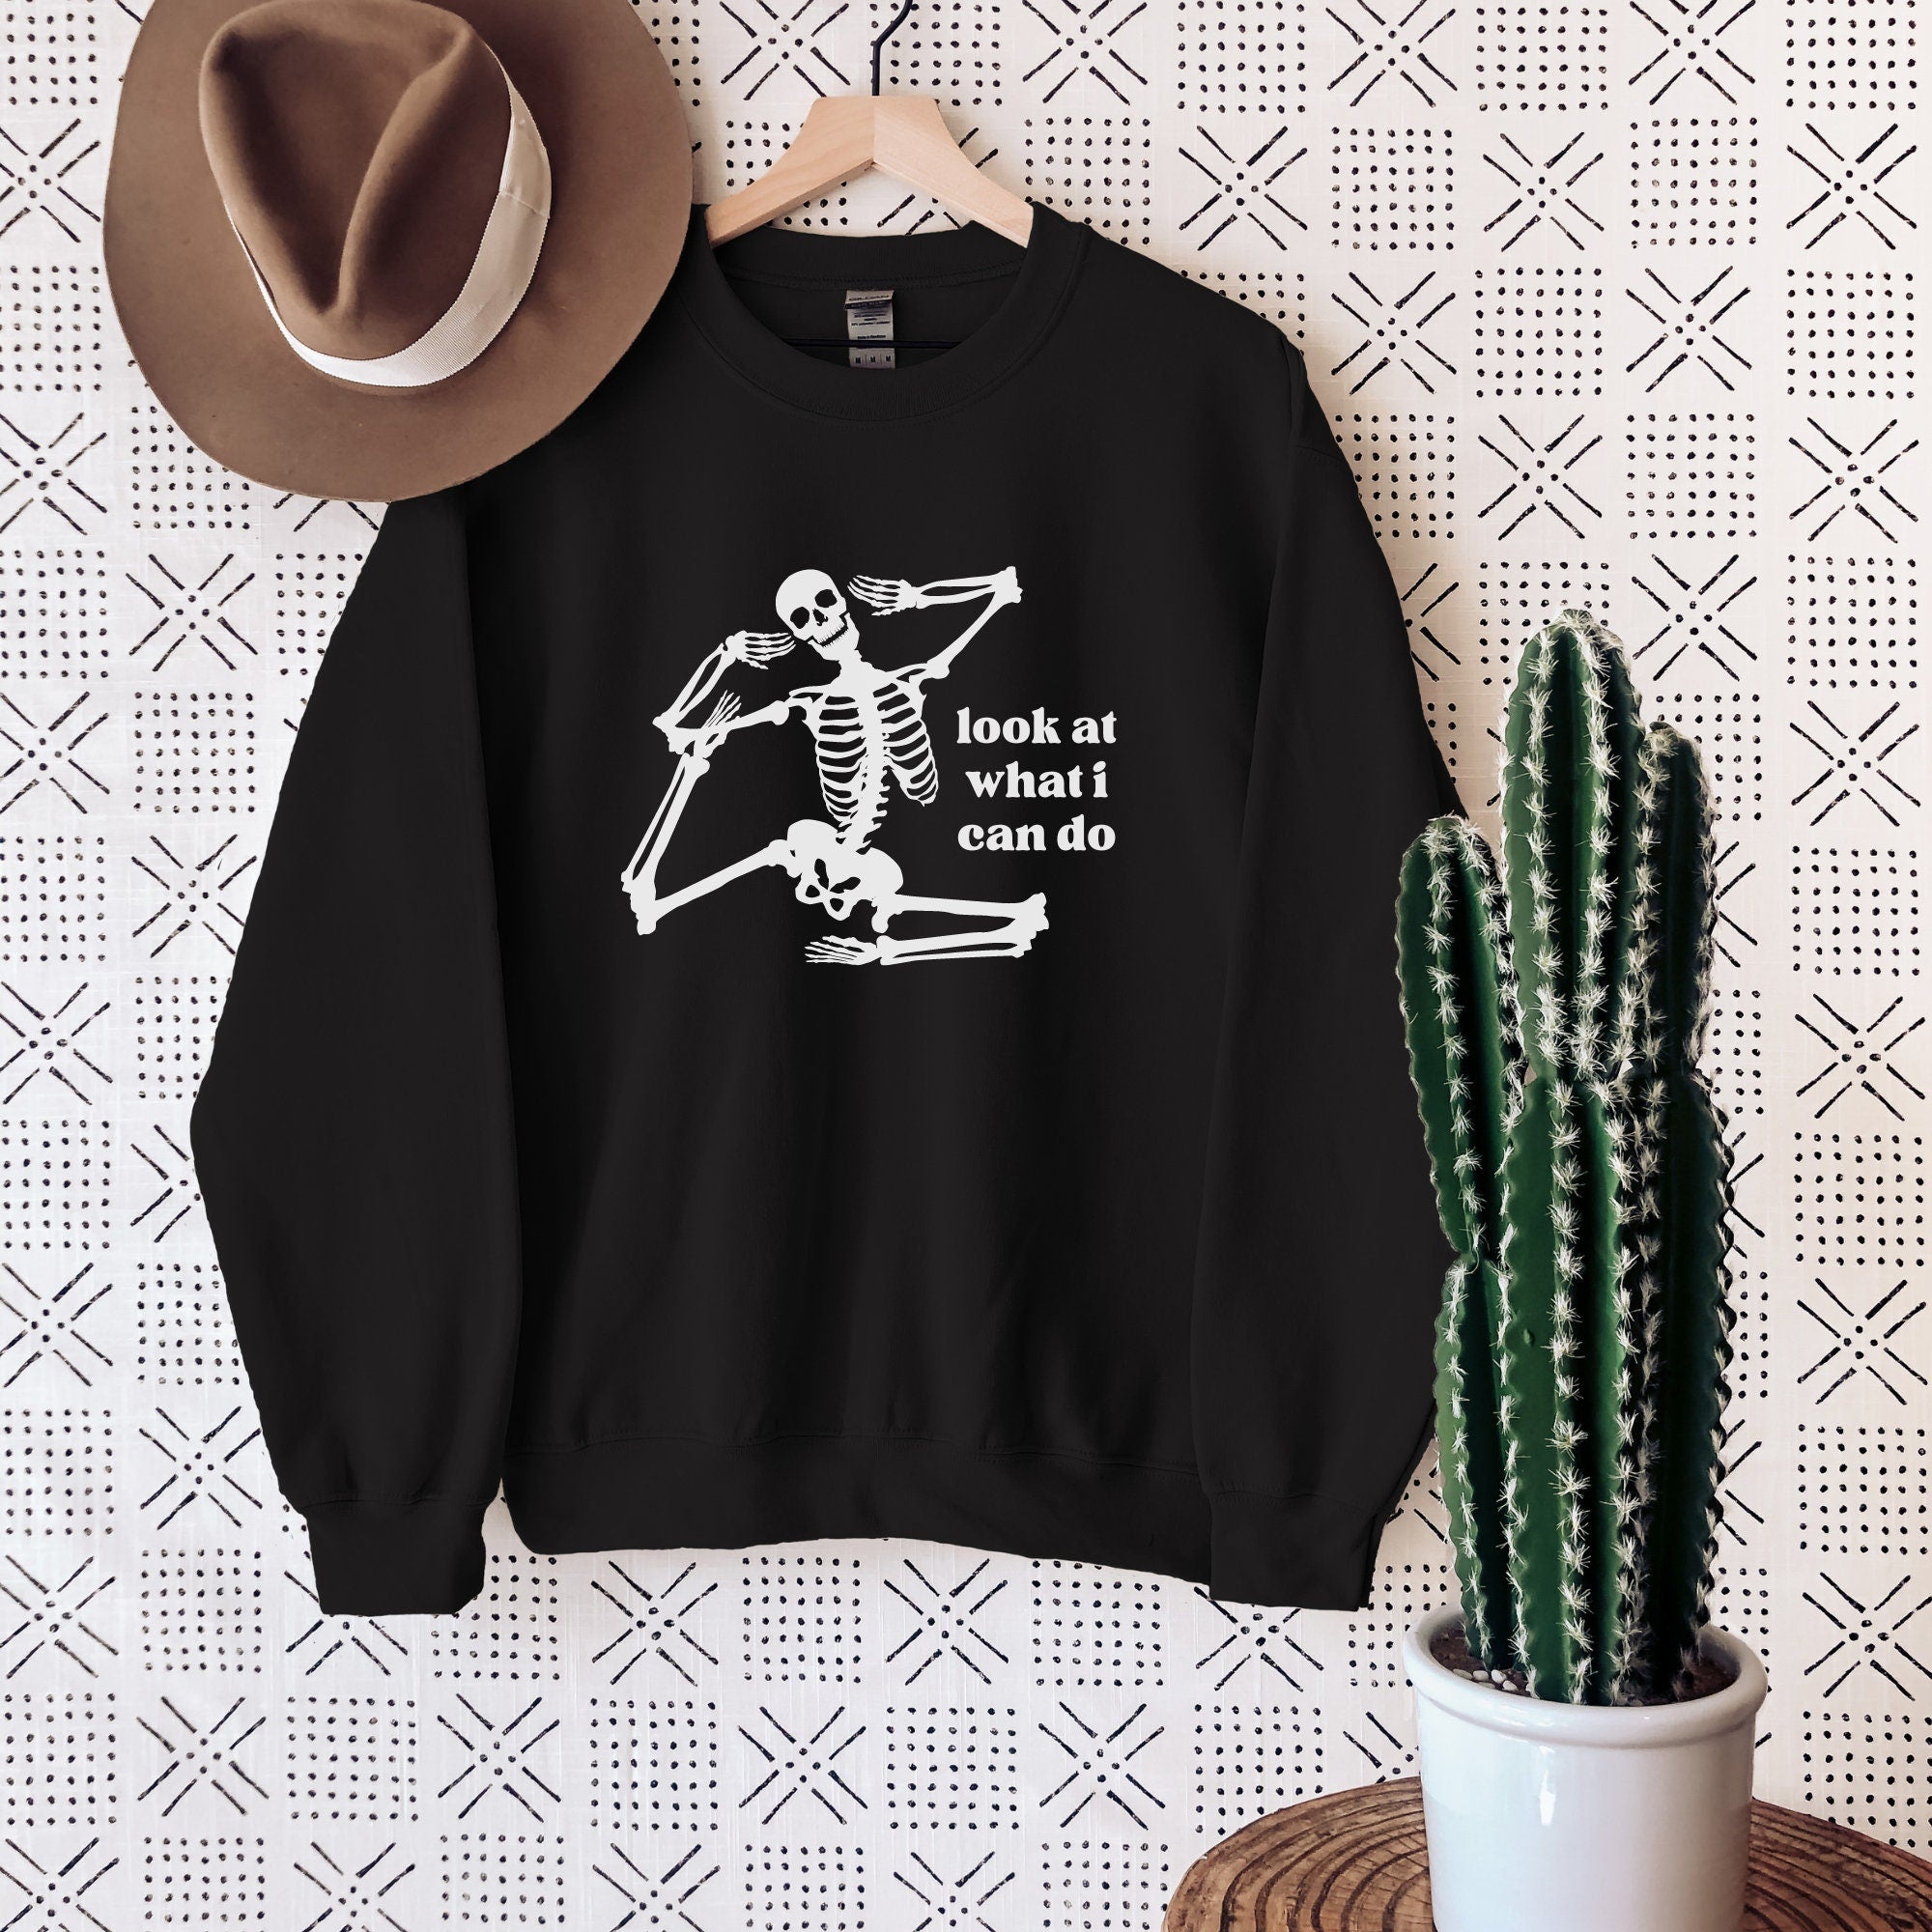 Look At What I Can Do Shirt | Skeleton Sweatshirt for Women | Skeleton Sweatshirt for Men | Funny Costume for Halloween Party